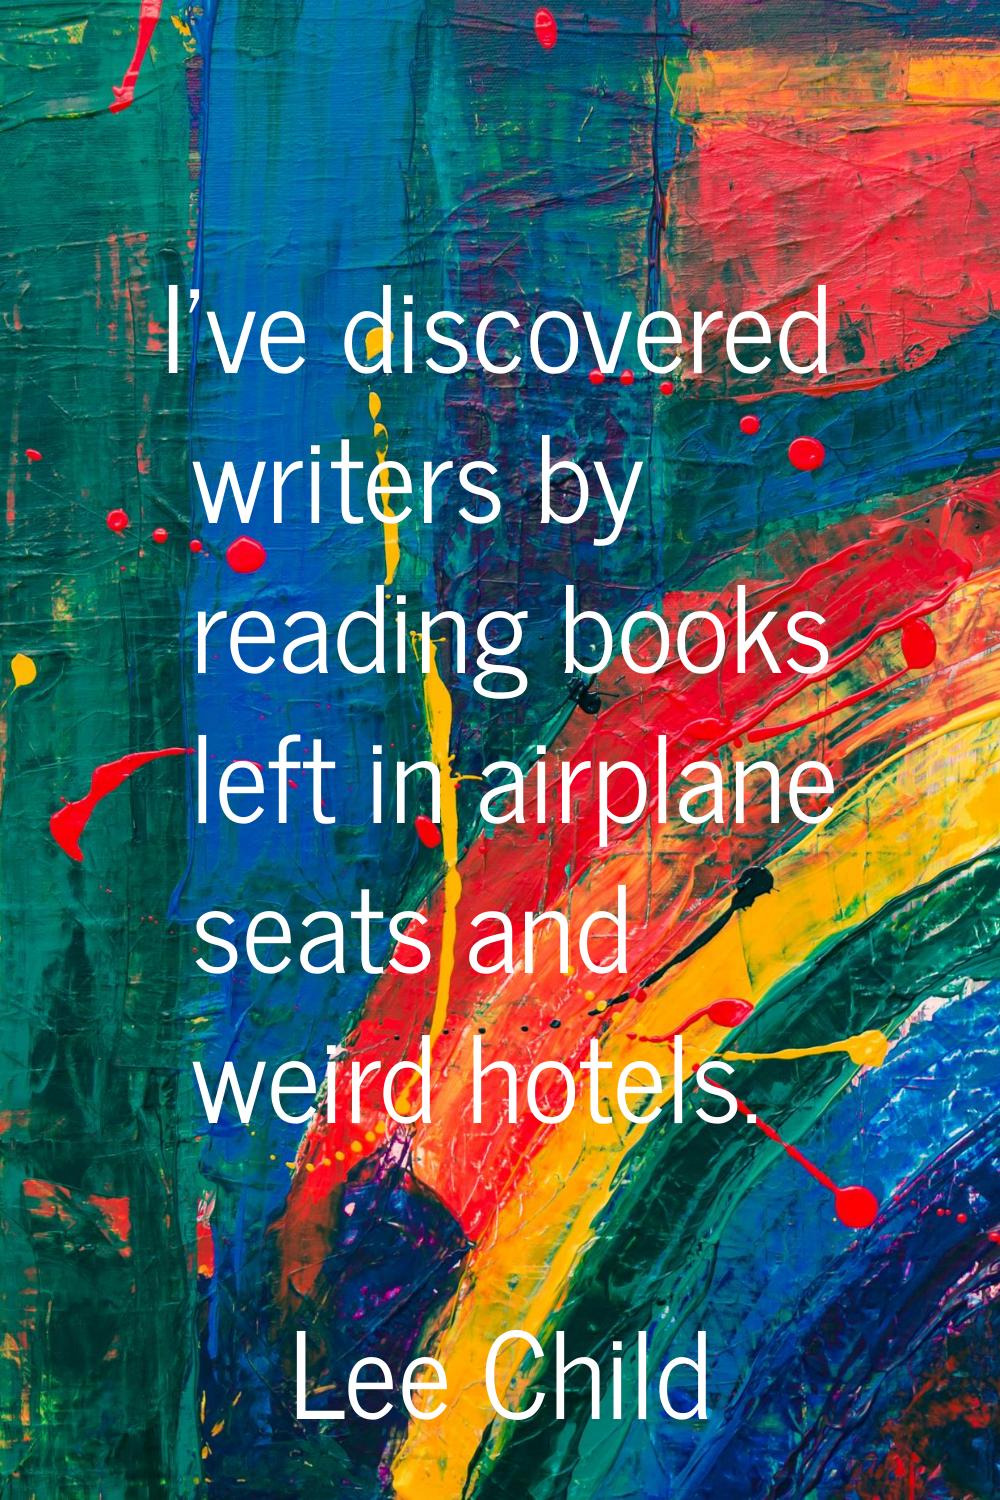 I've discovered writers by reading books left in airplane seats and weird hotels.